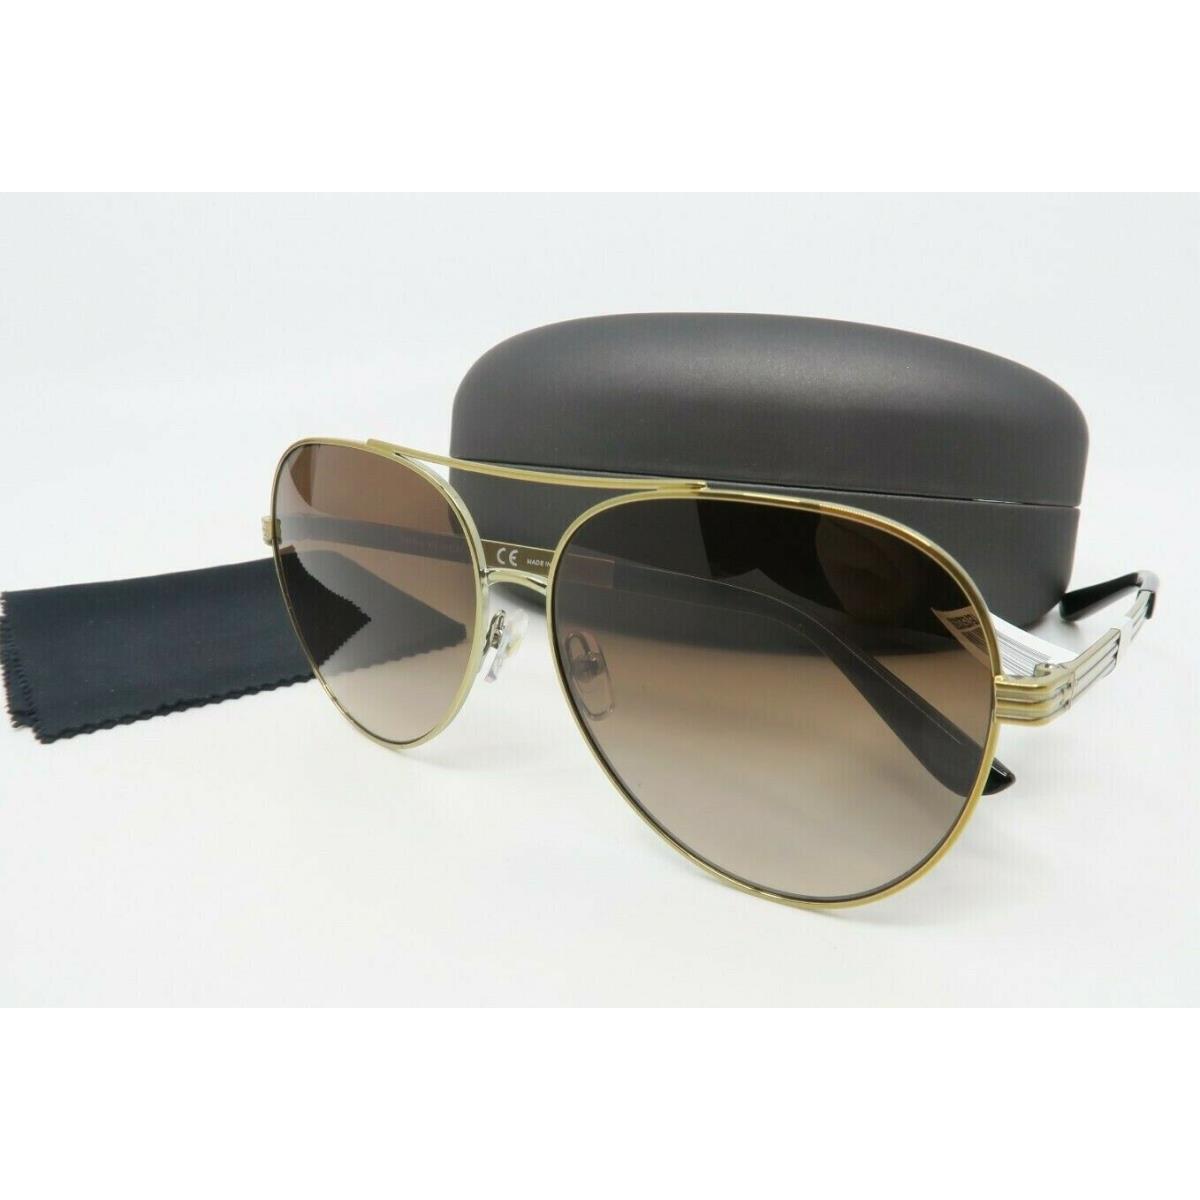 Tory Burch TY6078 3250/13 Gold/ Brown Aviator Sunglasses 59mm with Case ...